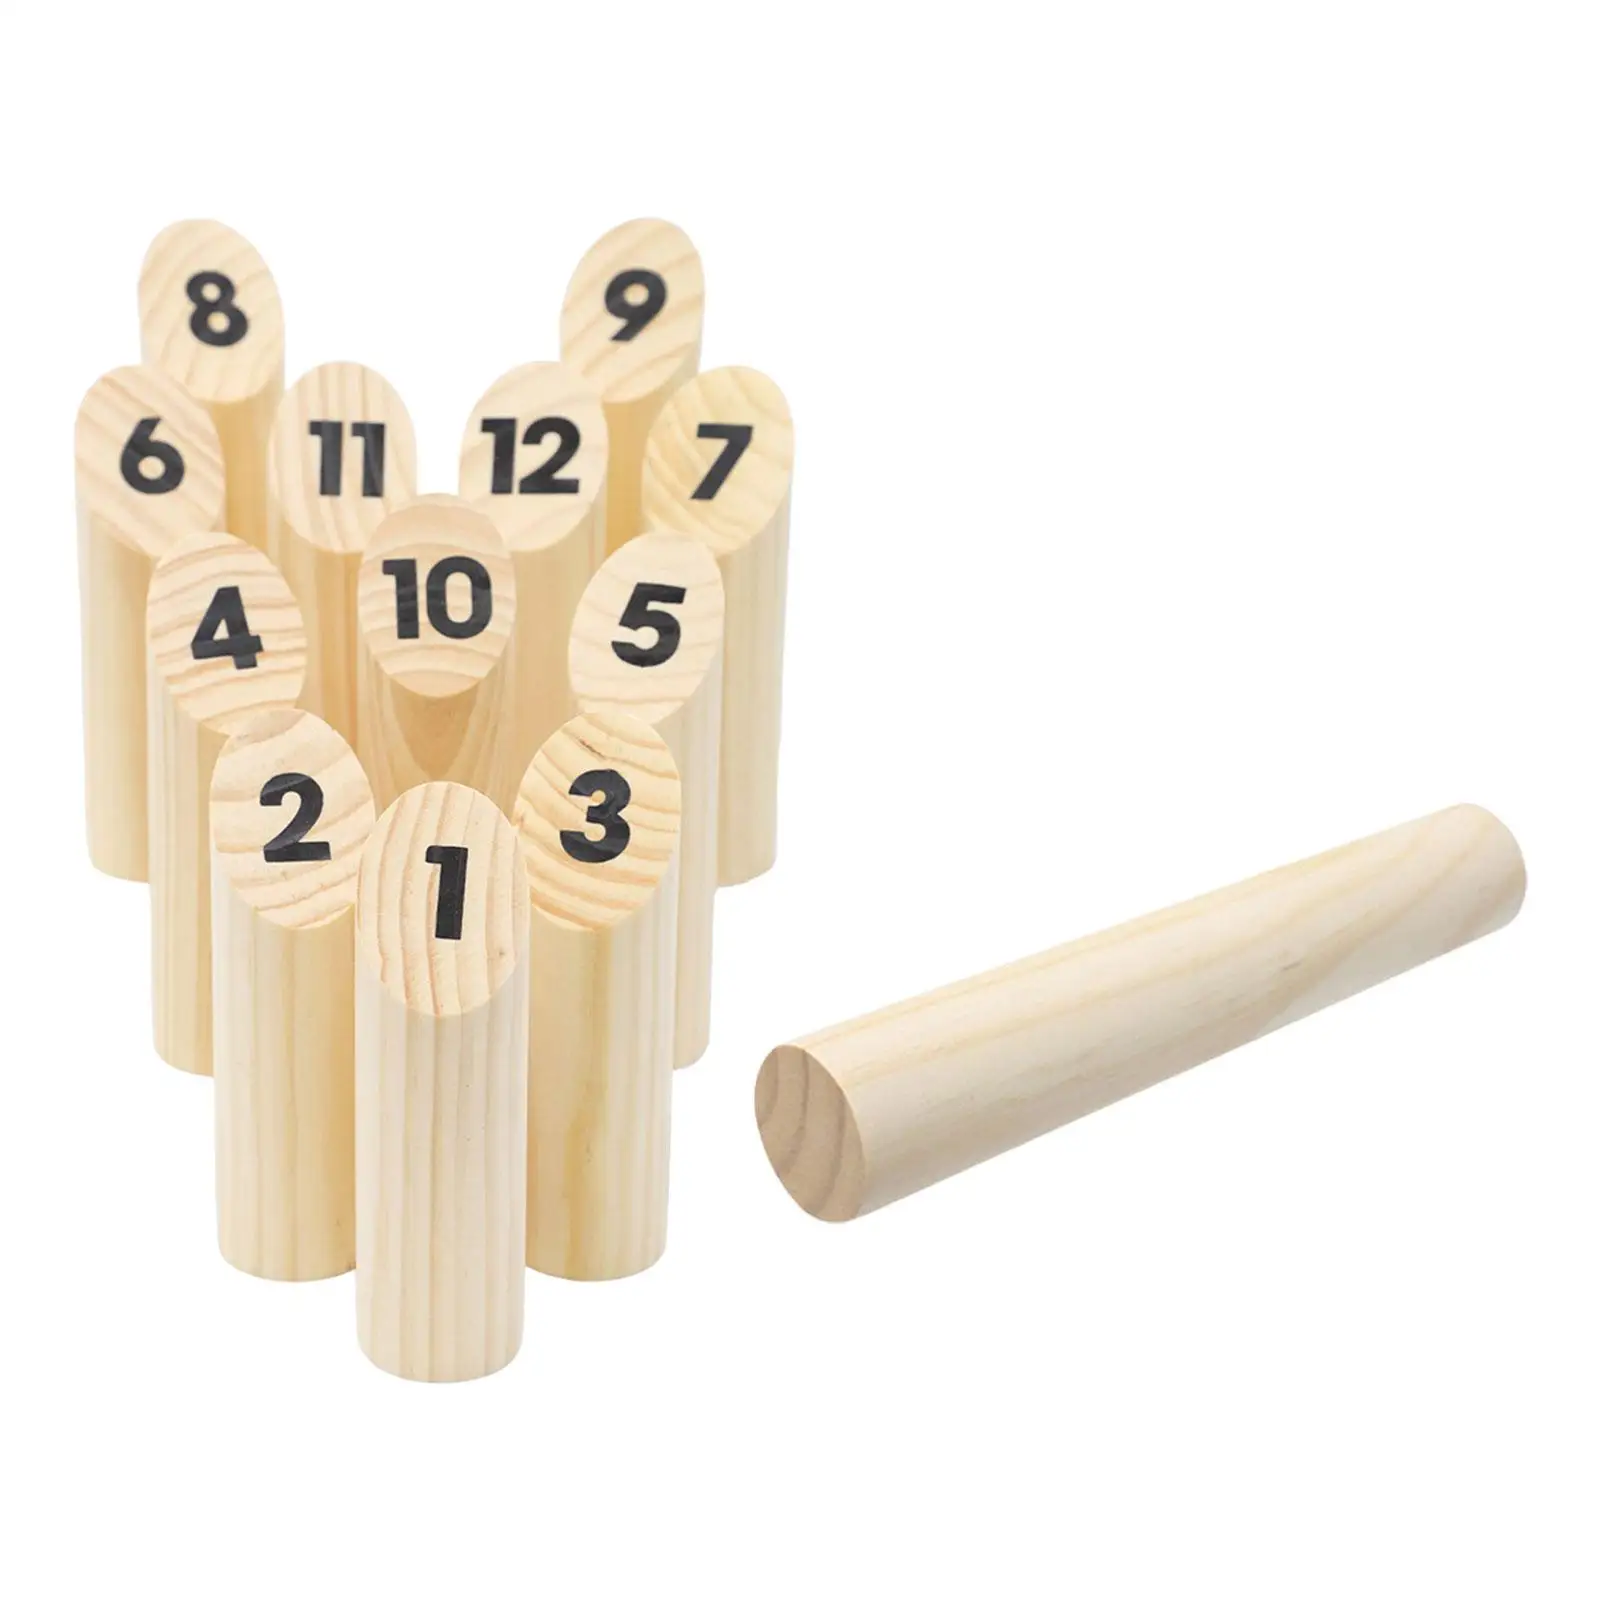 Wood Numbered Block Tossing Game Yard Game Toy Set for Indoor Outdoor Beach party